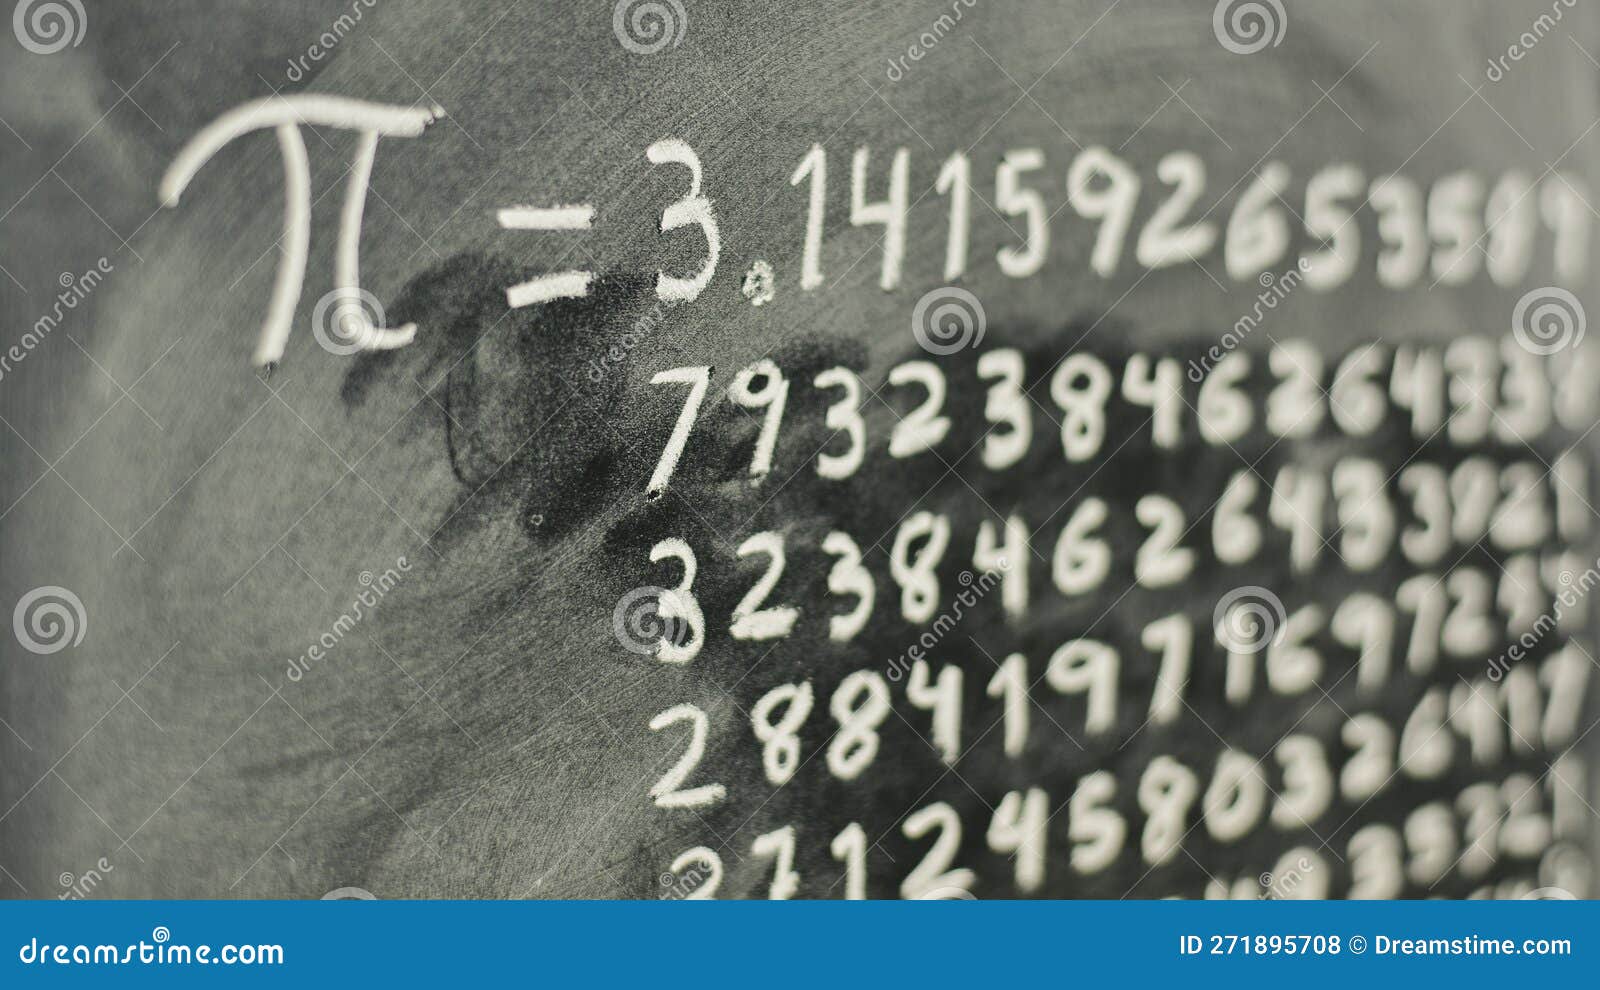 mathematical number pi, written with chalk on a blackboard